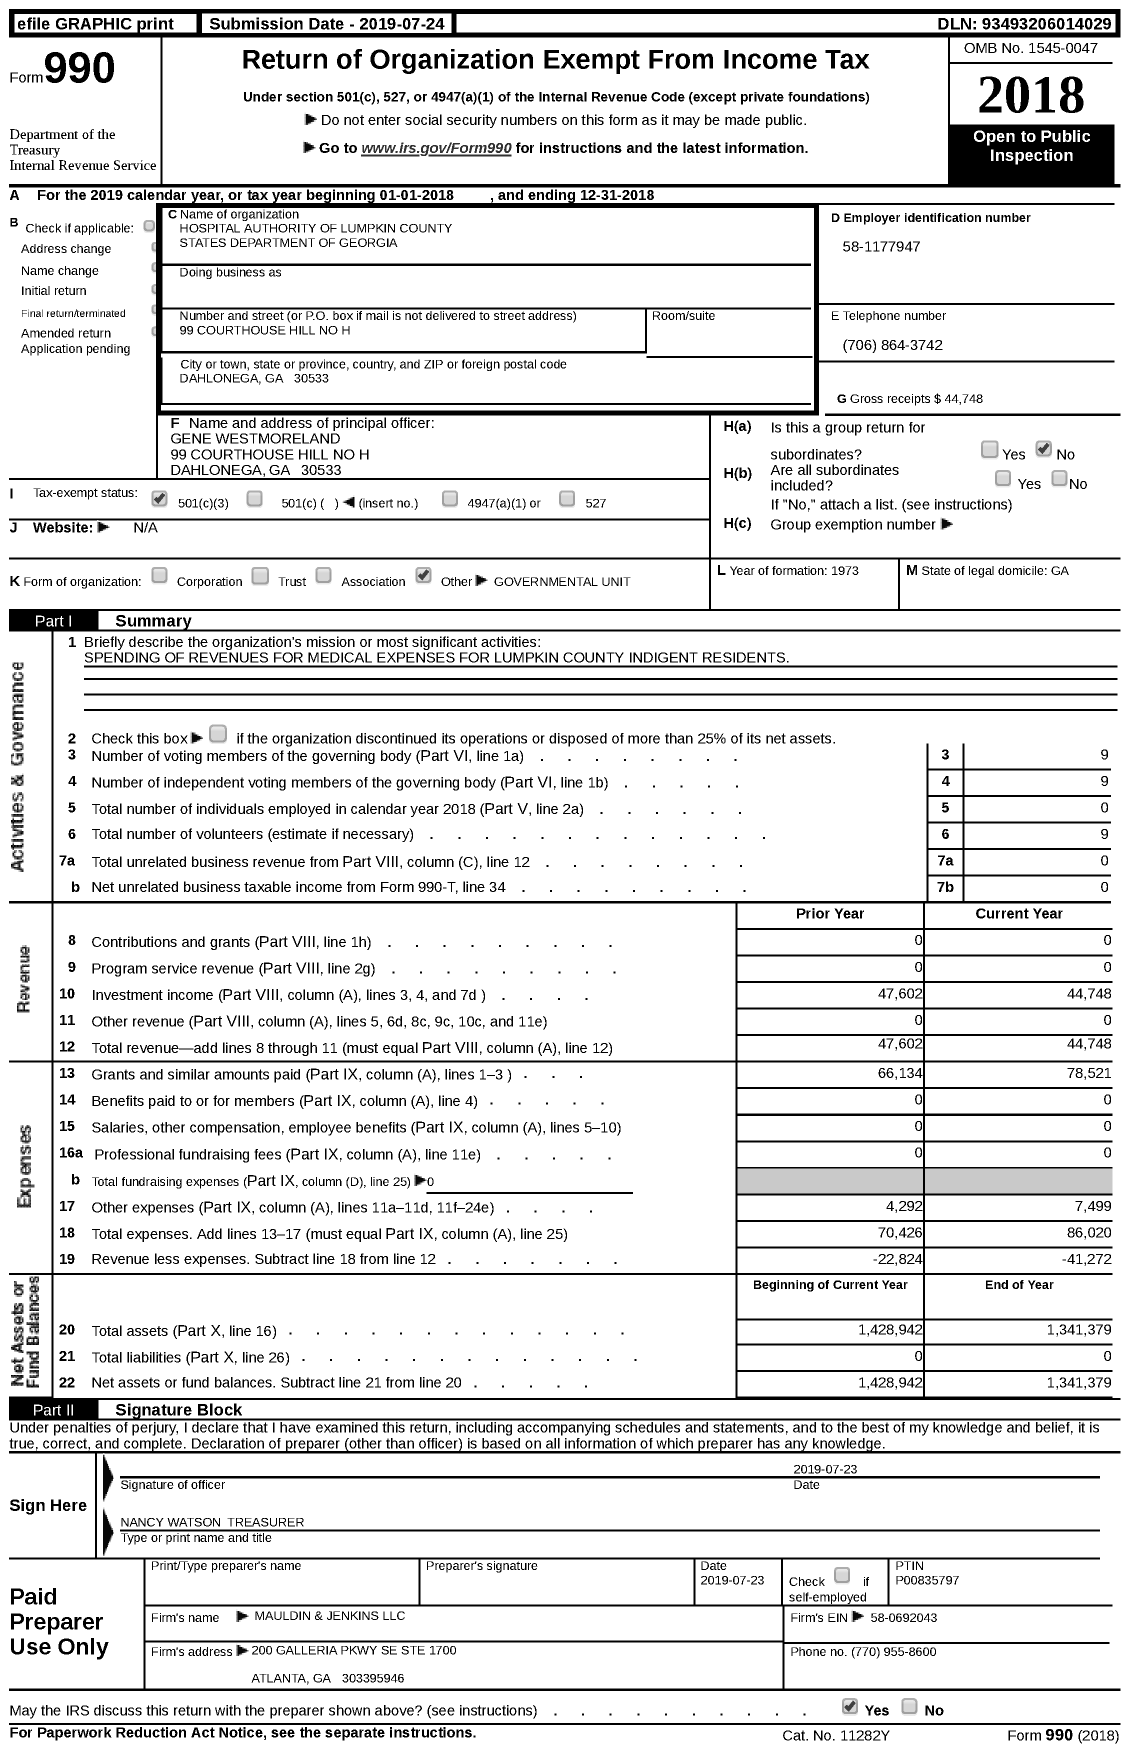 Image of first page of 2018 Form 990 for Hospital Authority of Lumpkin County States Department of Georgia